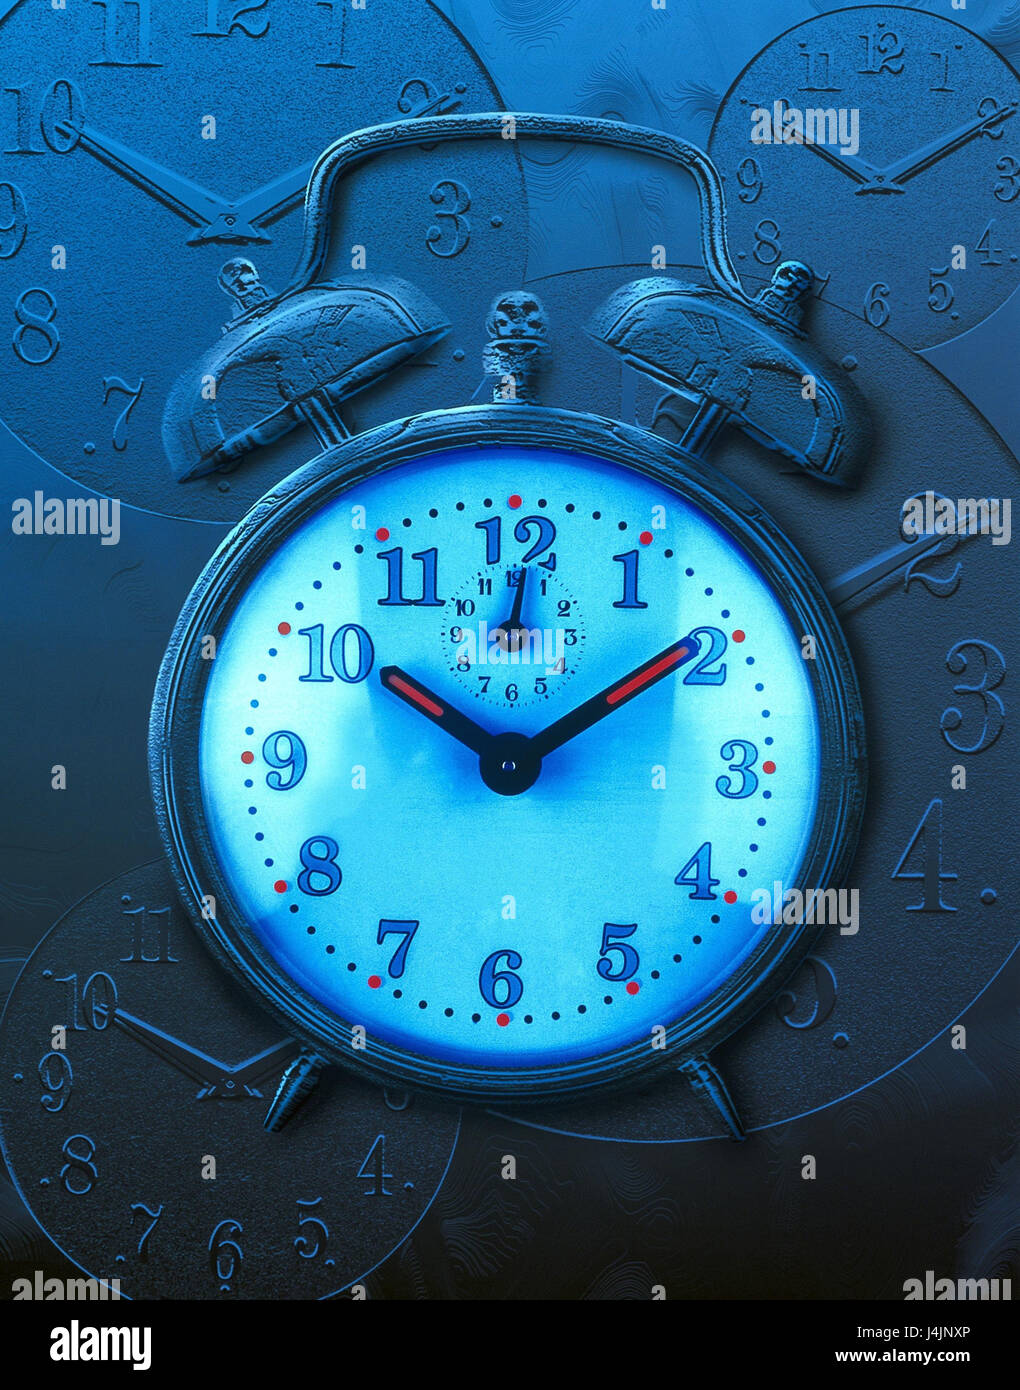 Alarm clock, dials, icon, time time, pointer, dial, pressure of time, transitoriness, hand Stock Photo